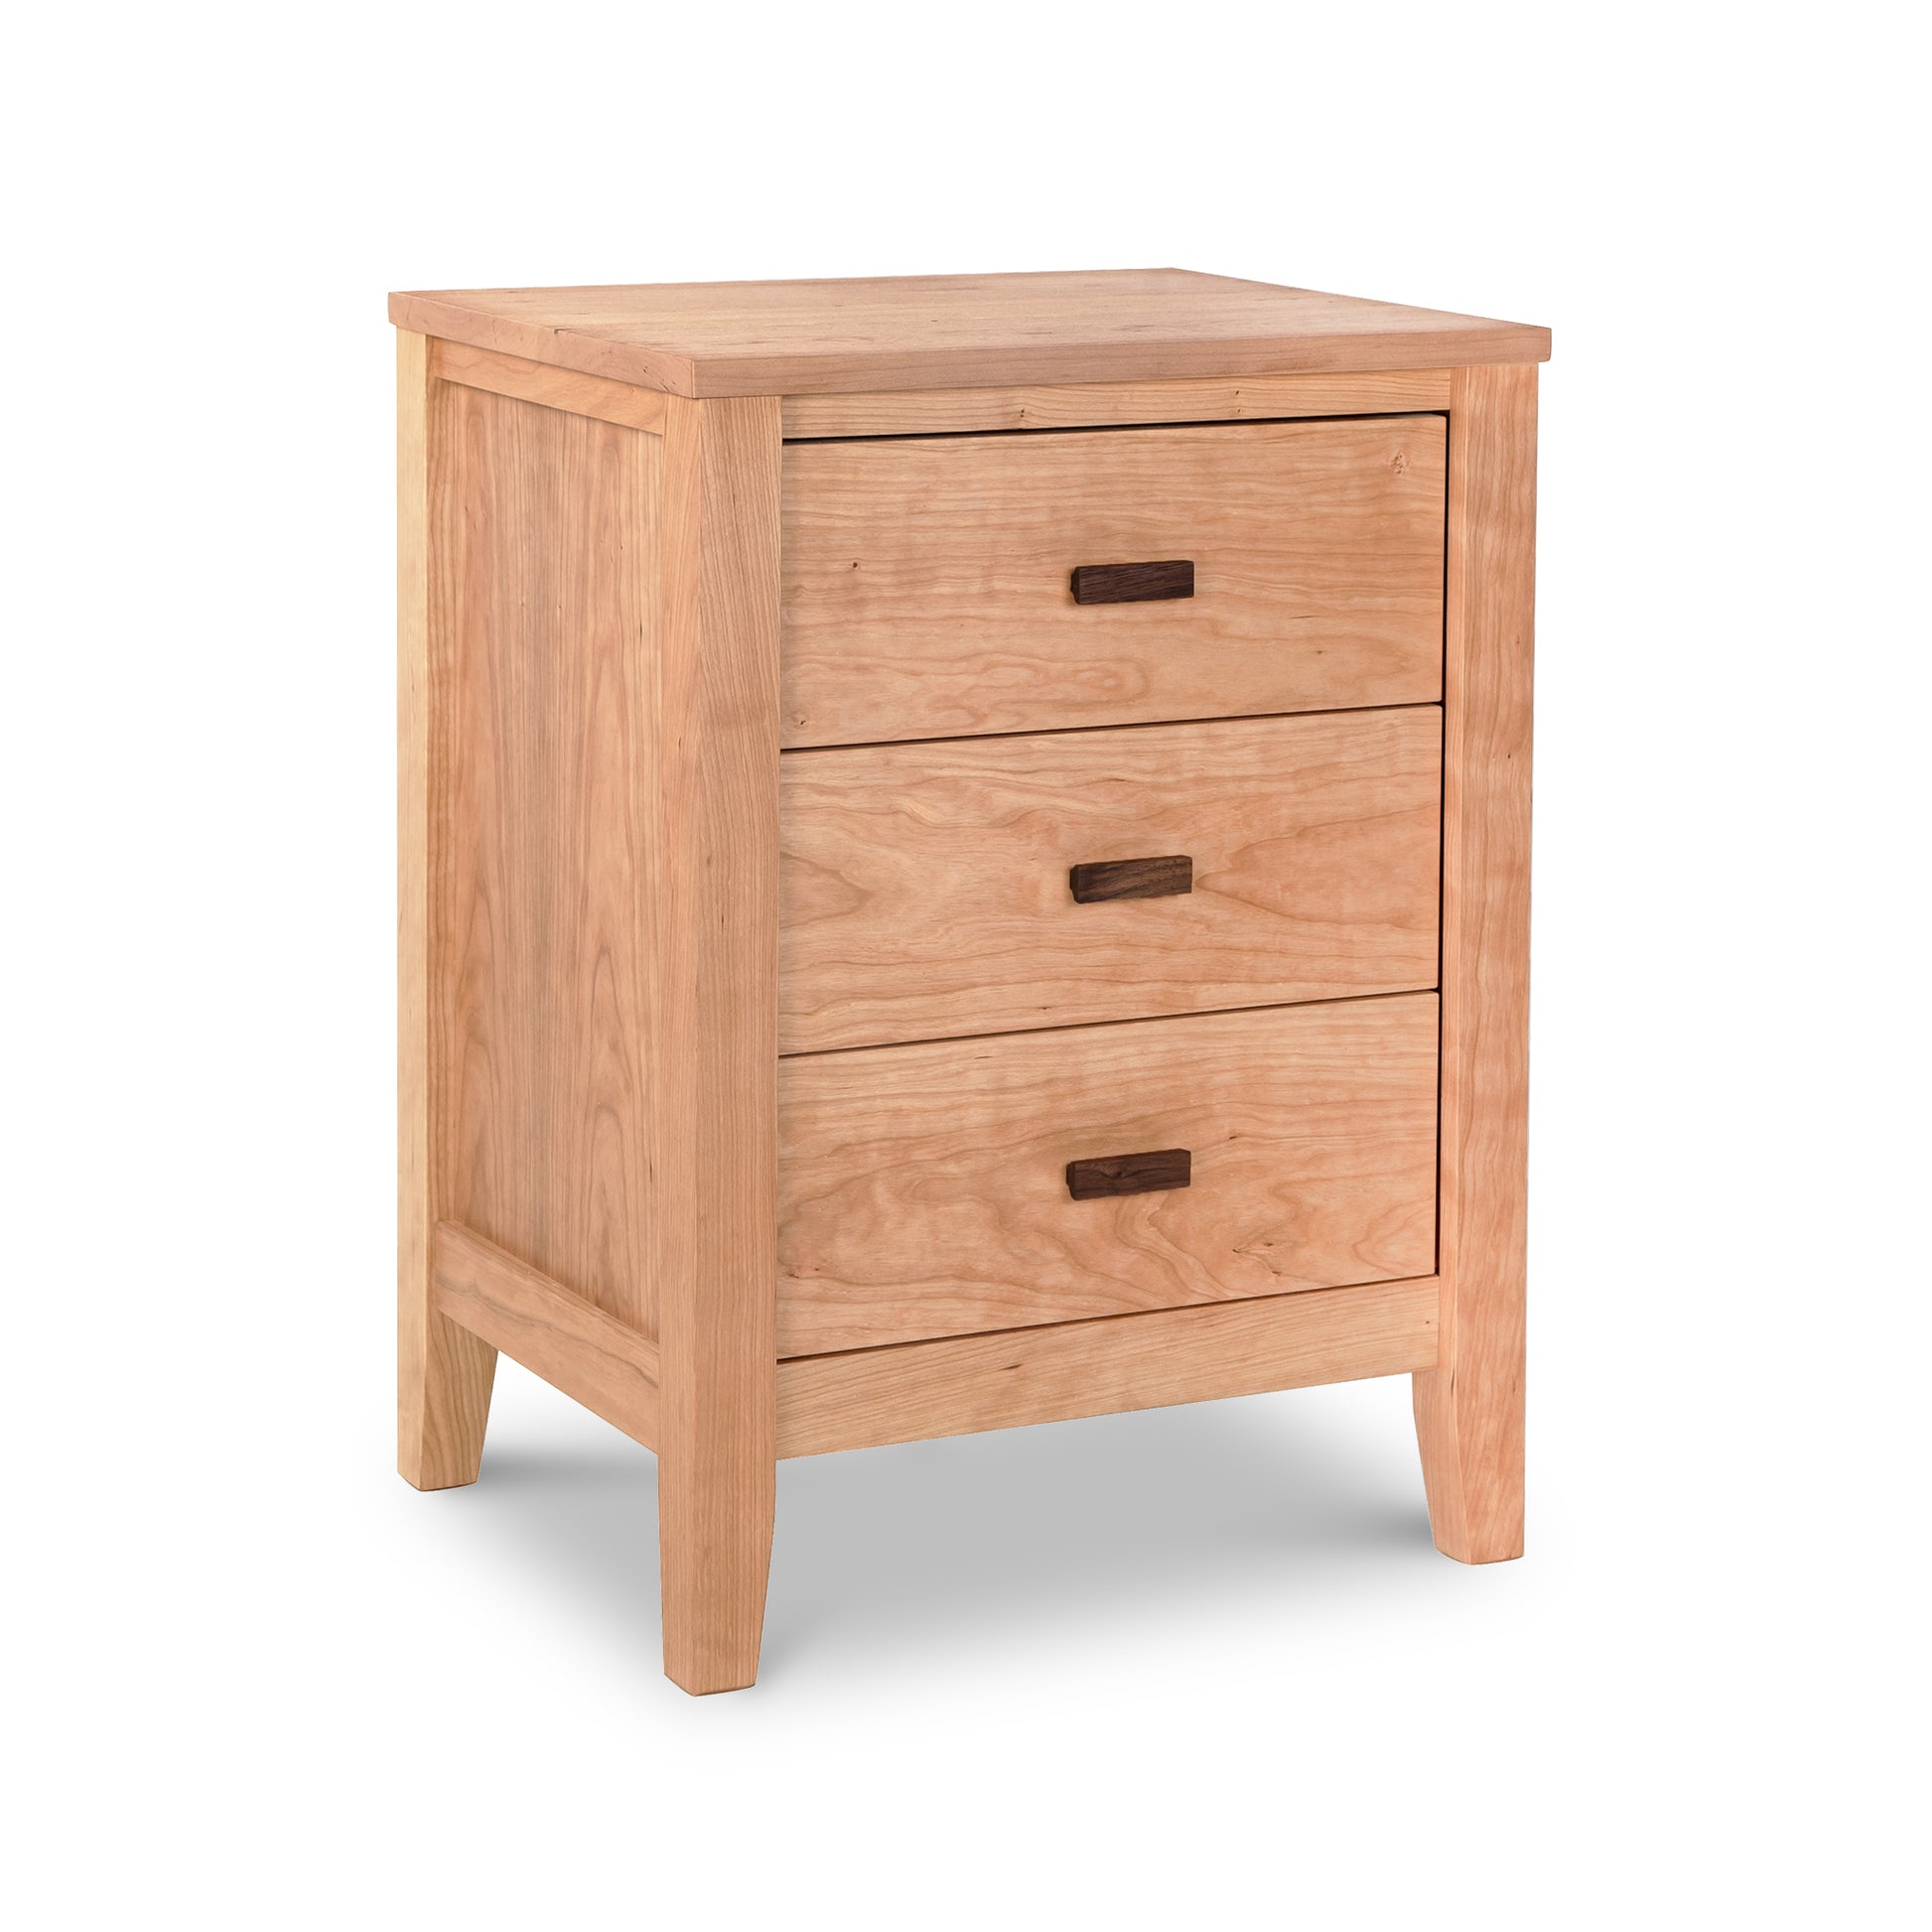 The Andover Modern 3-Drawer Nightstand by Maple Corner Woodworks, offering ample storage space.